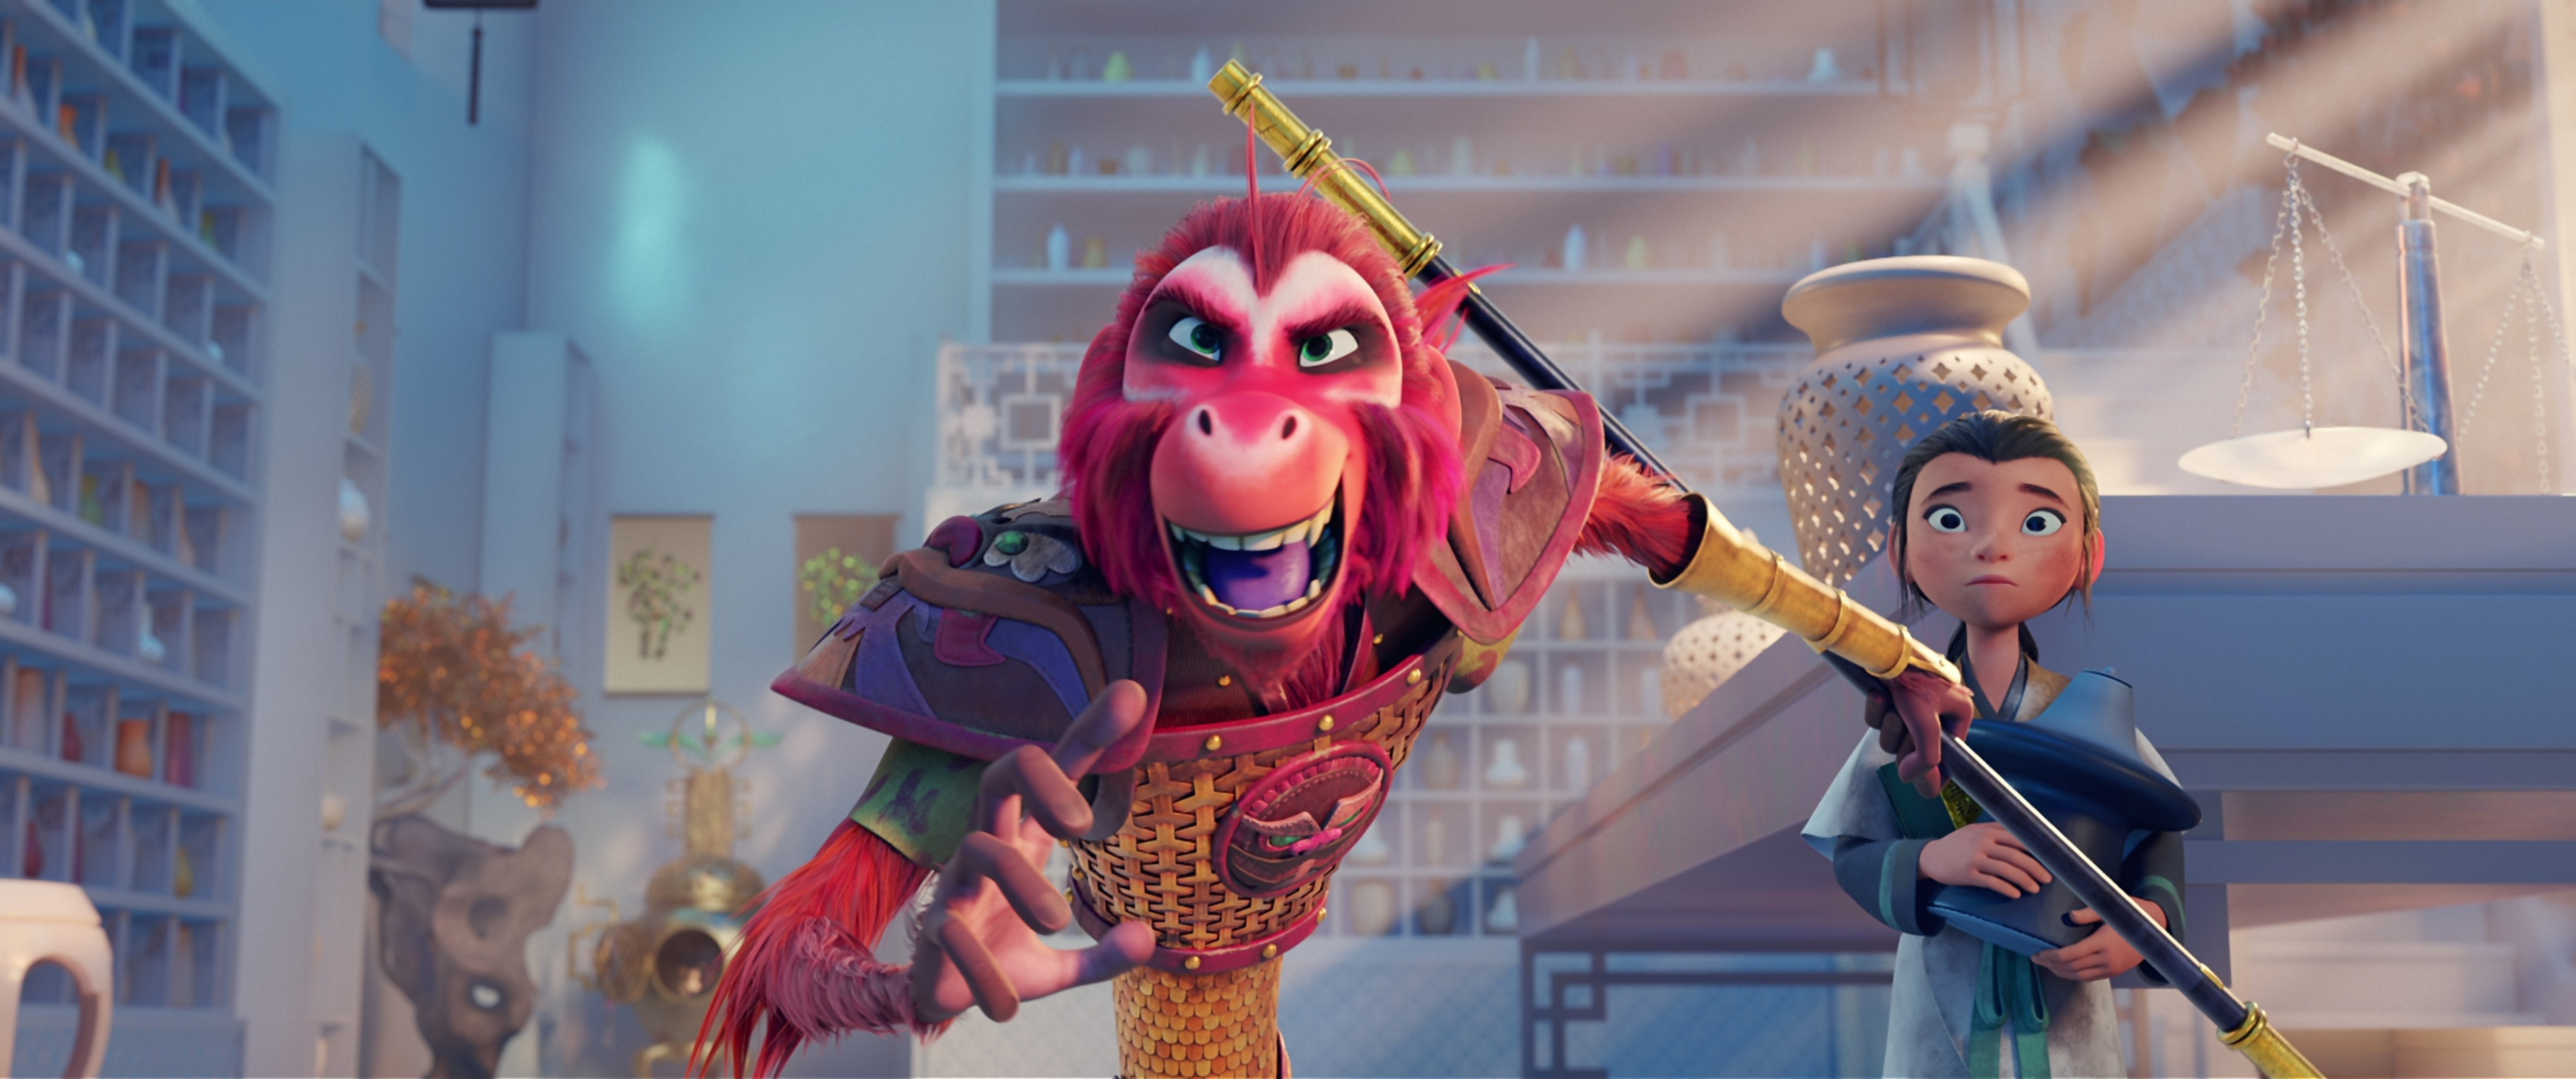 the monkey king review